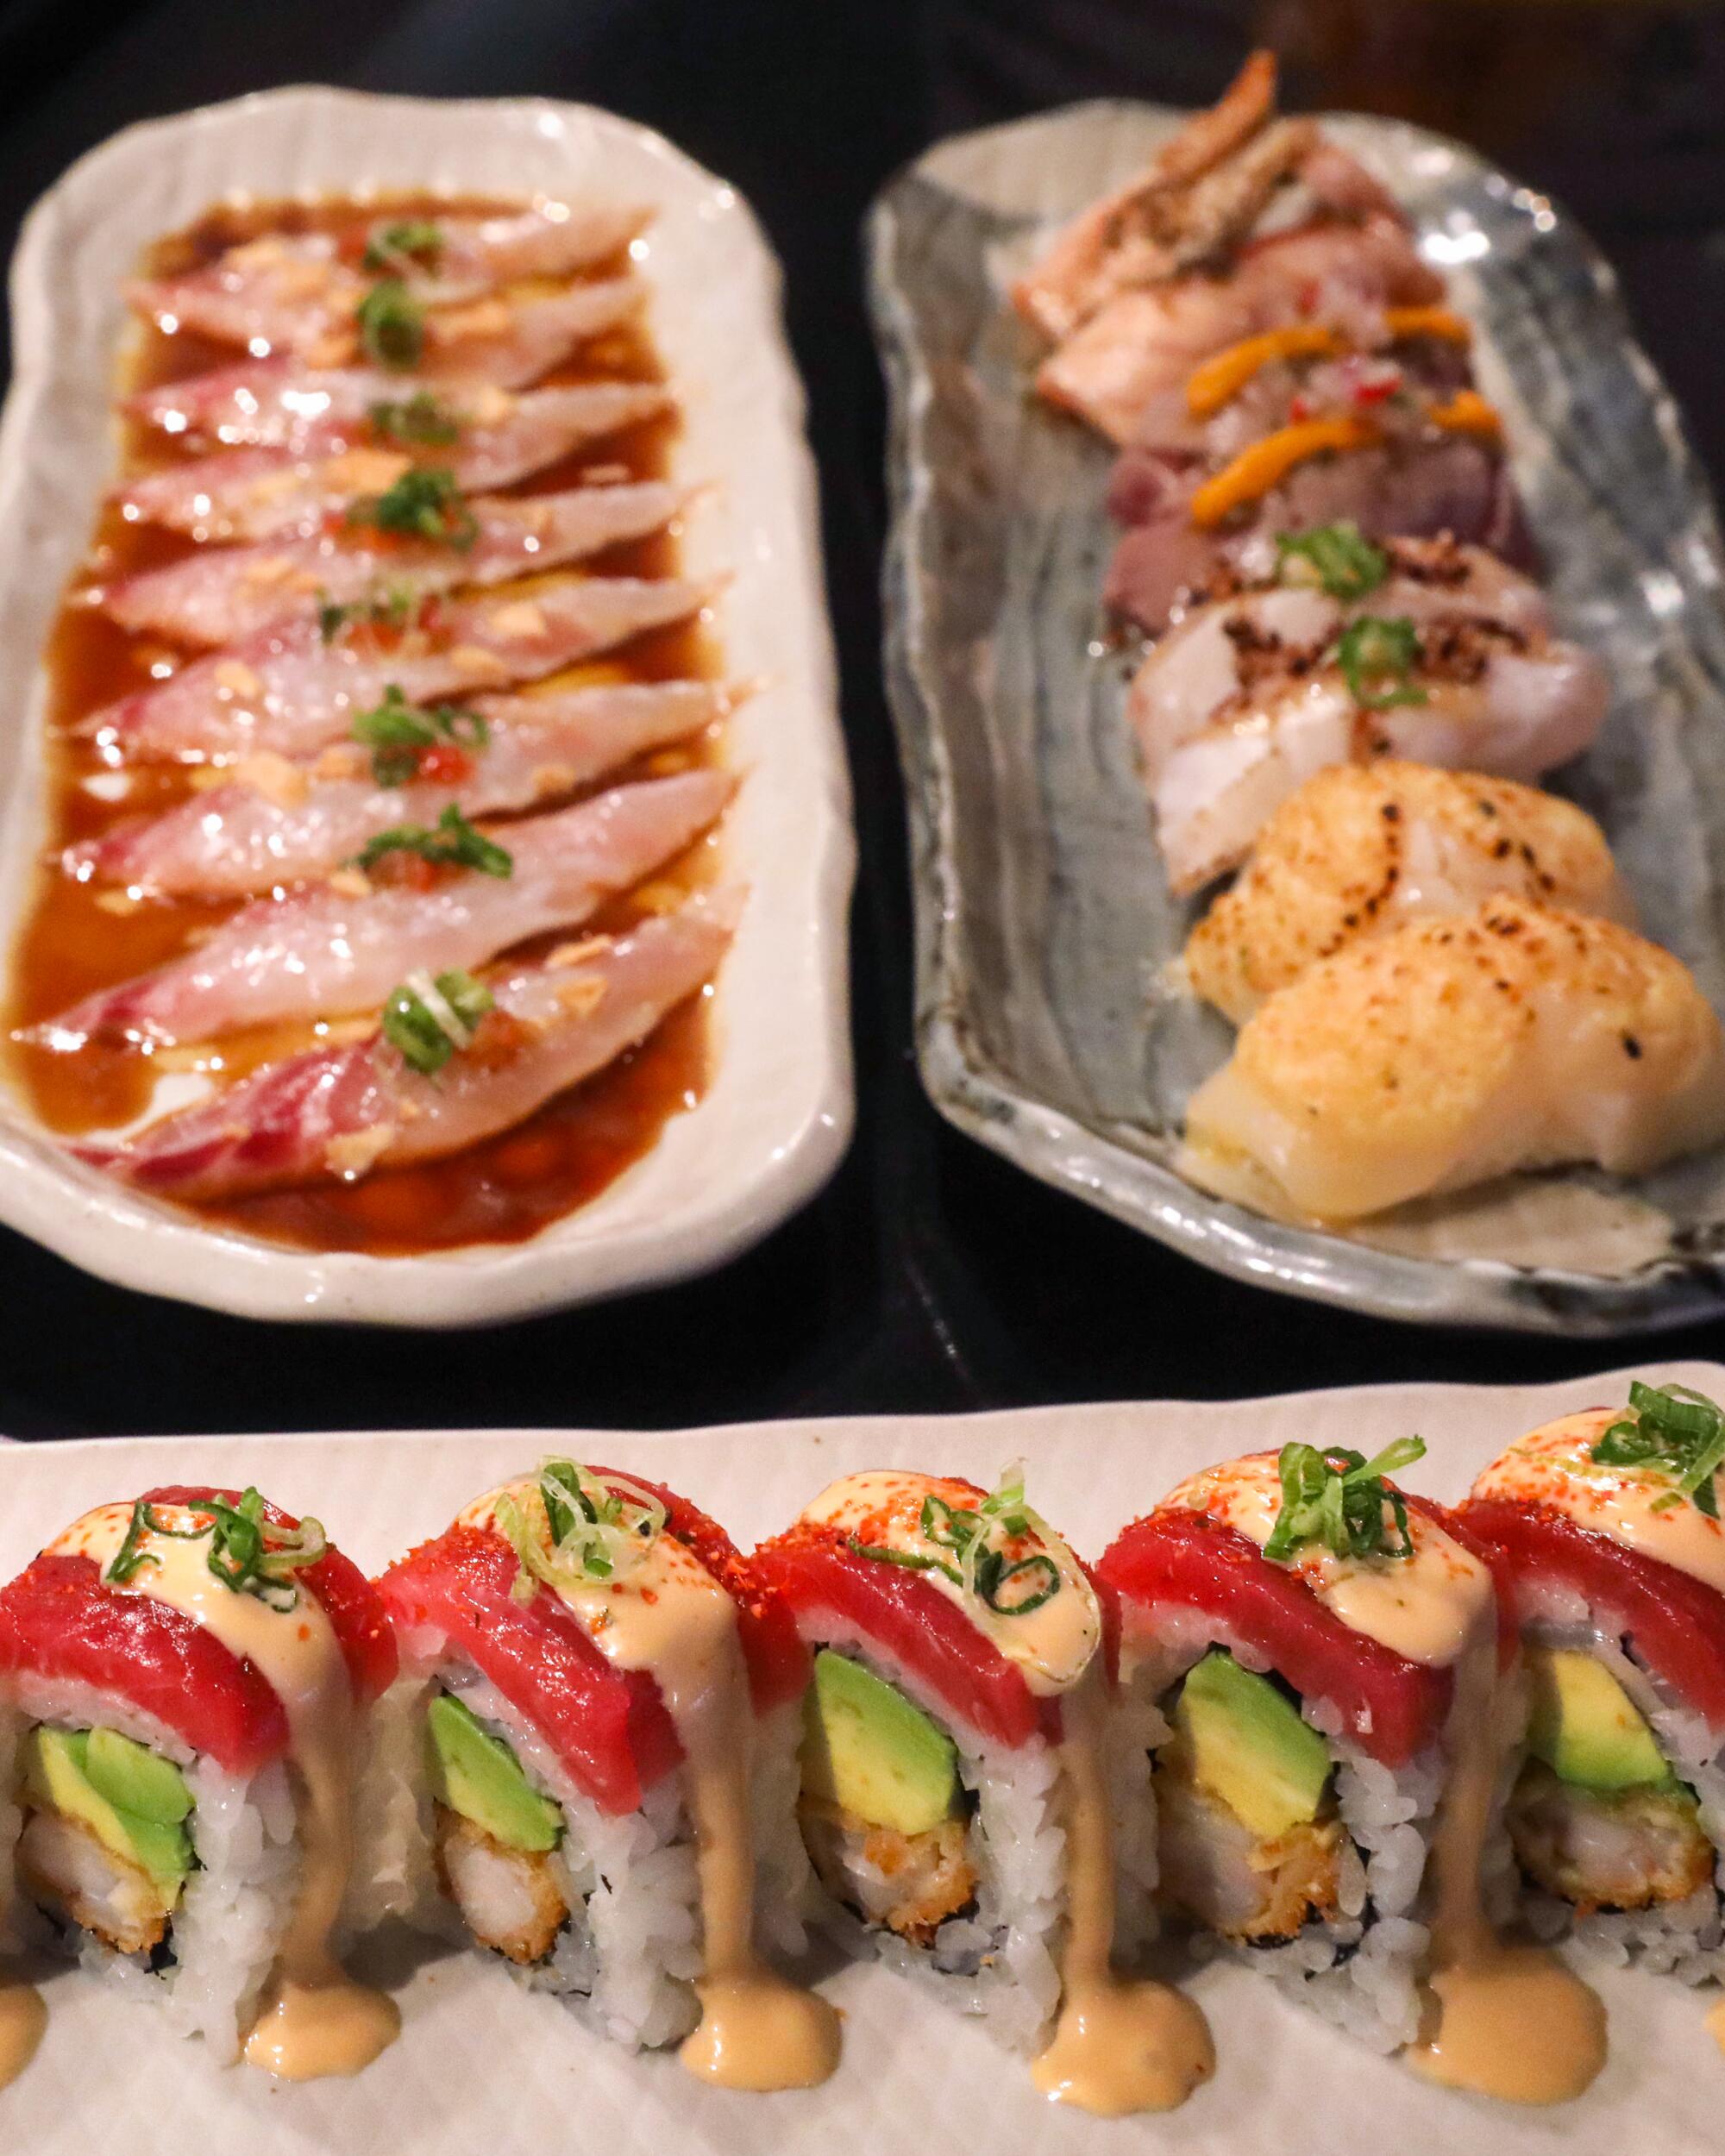 An array of sushi plates from Sushi Nikkei.